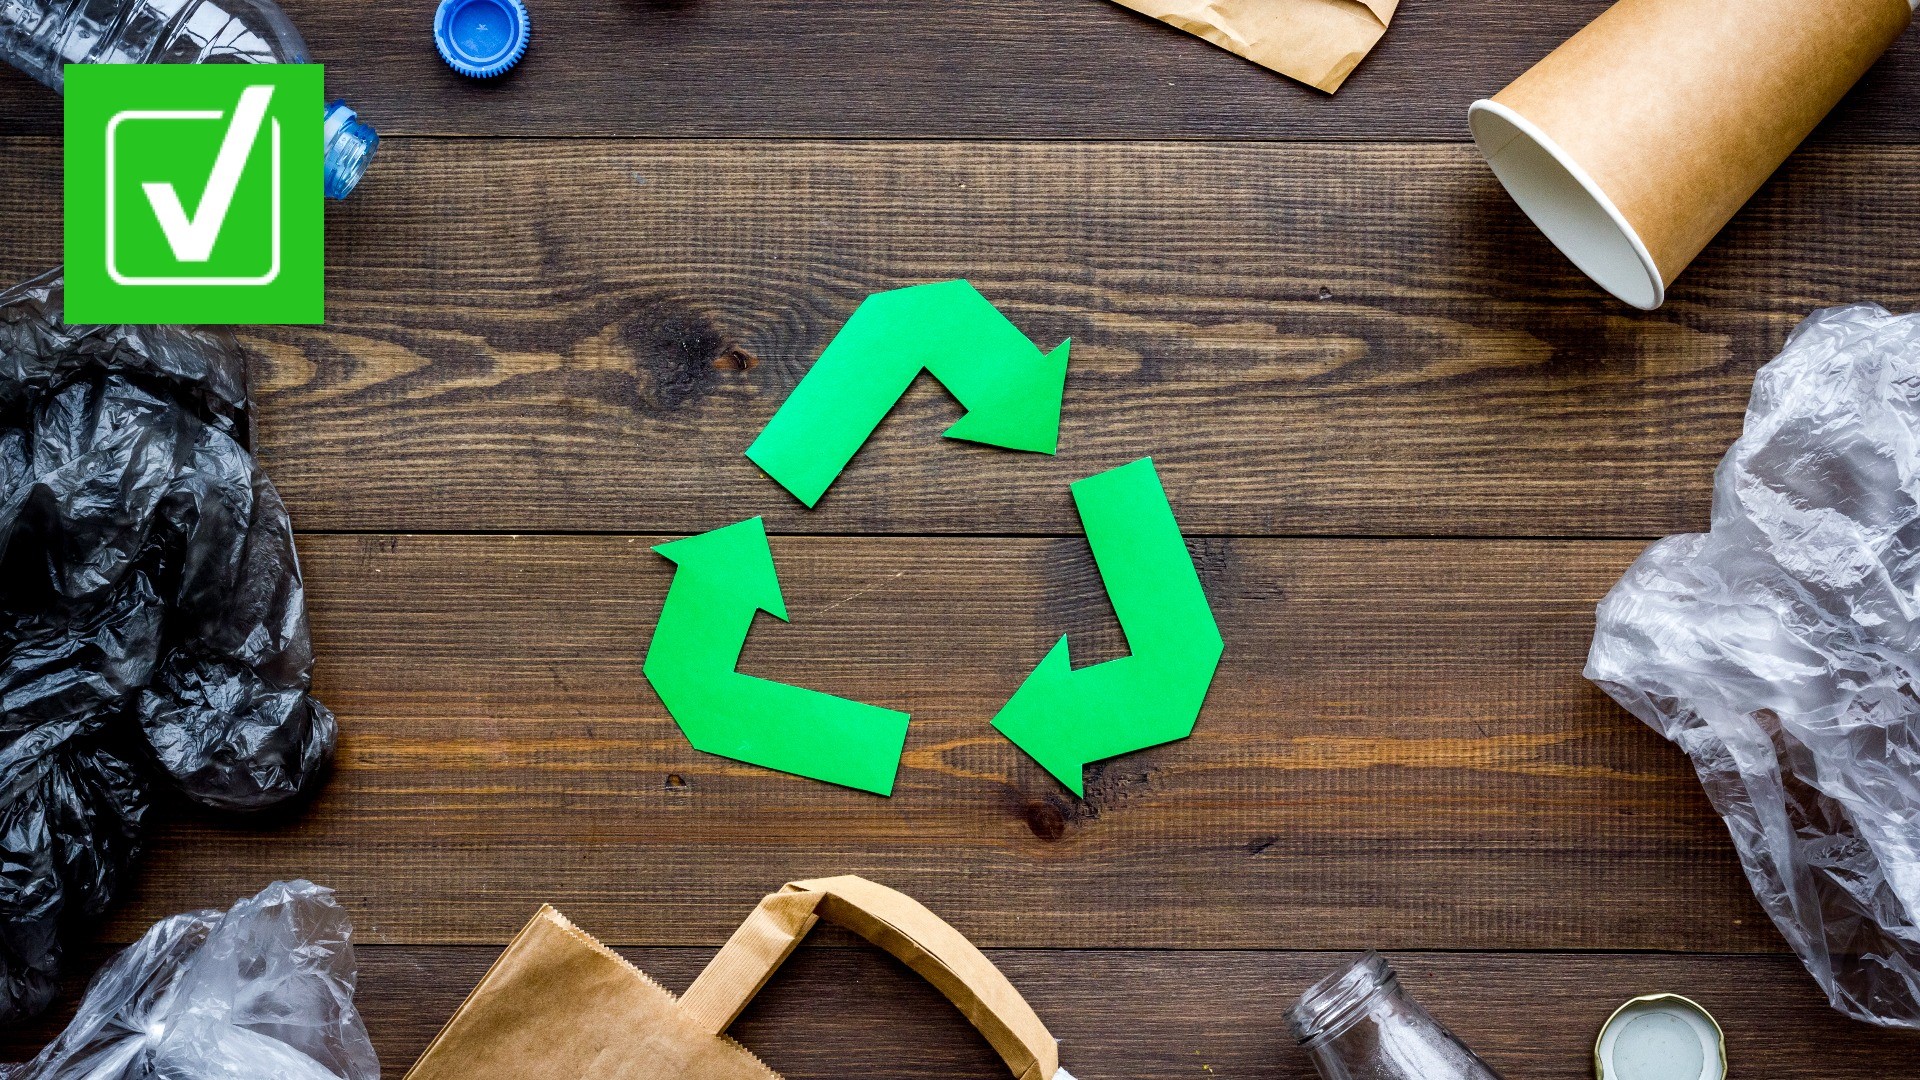 One out of every four items that go through the recycling system can't actually be recycled in Mecklenburg County.